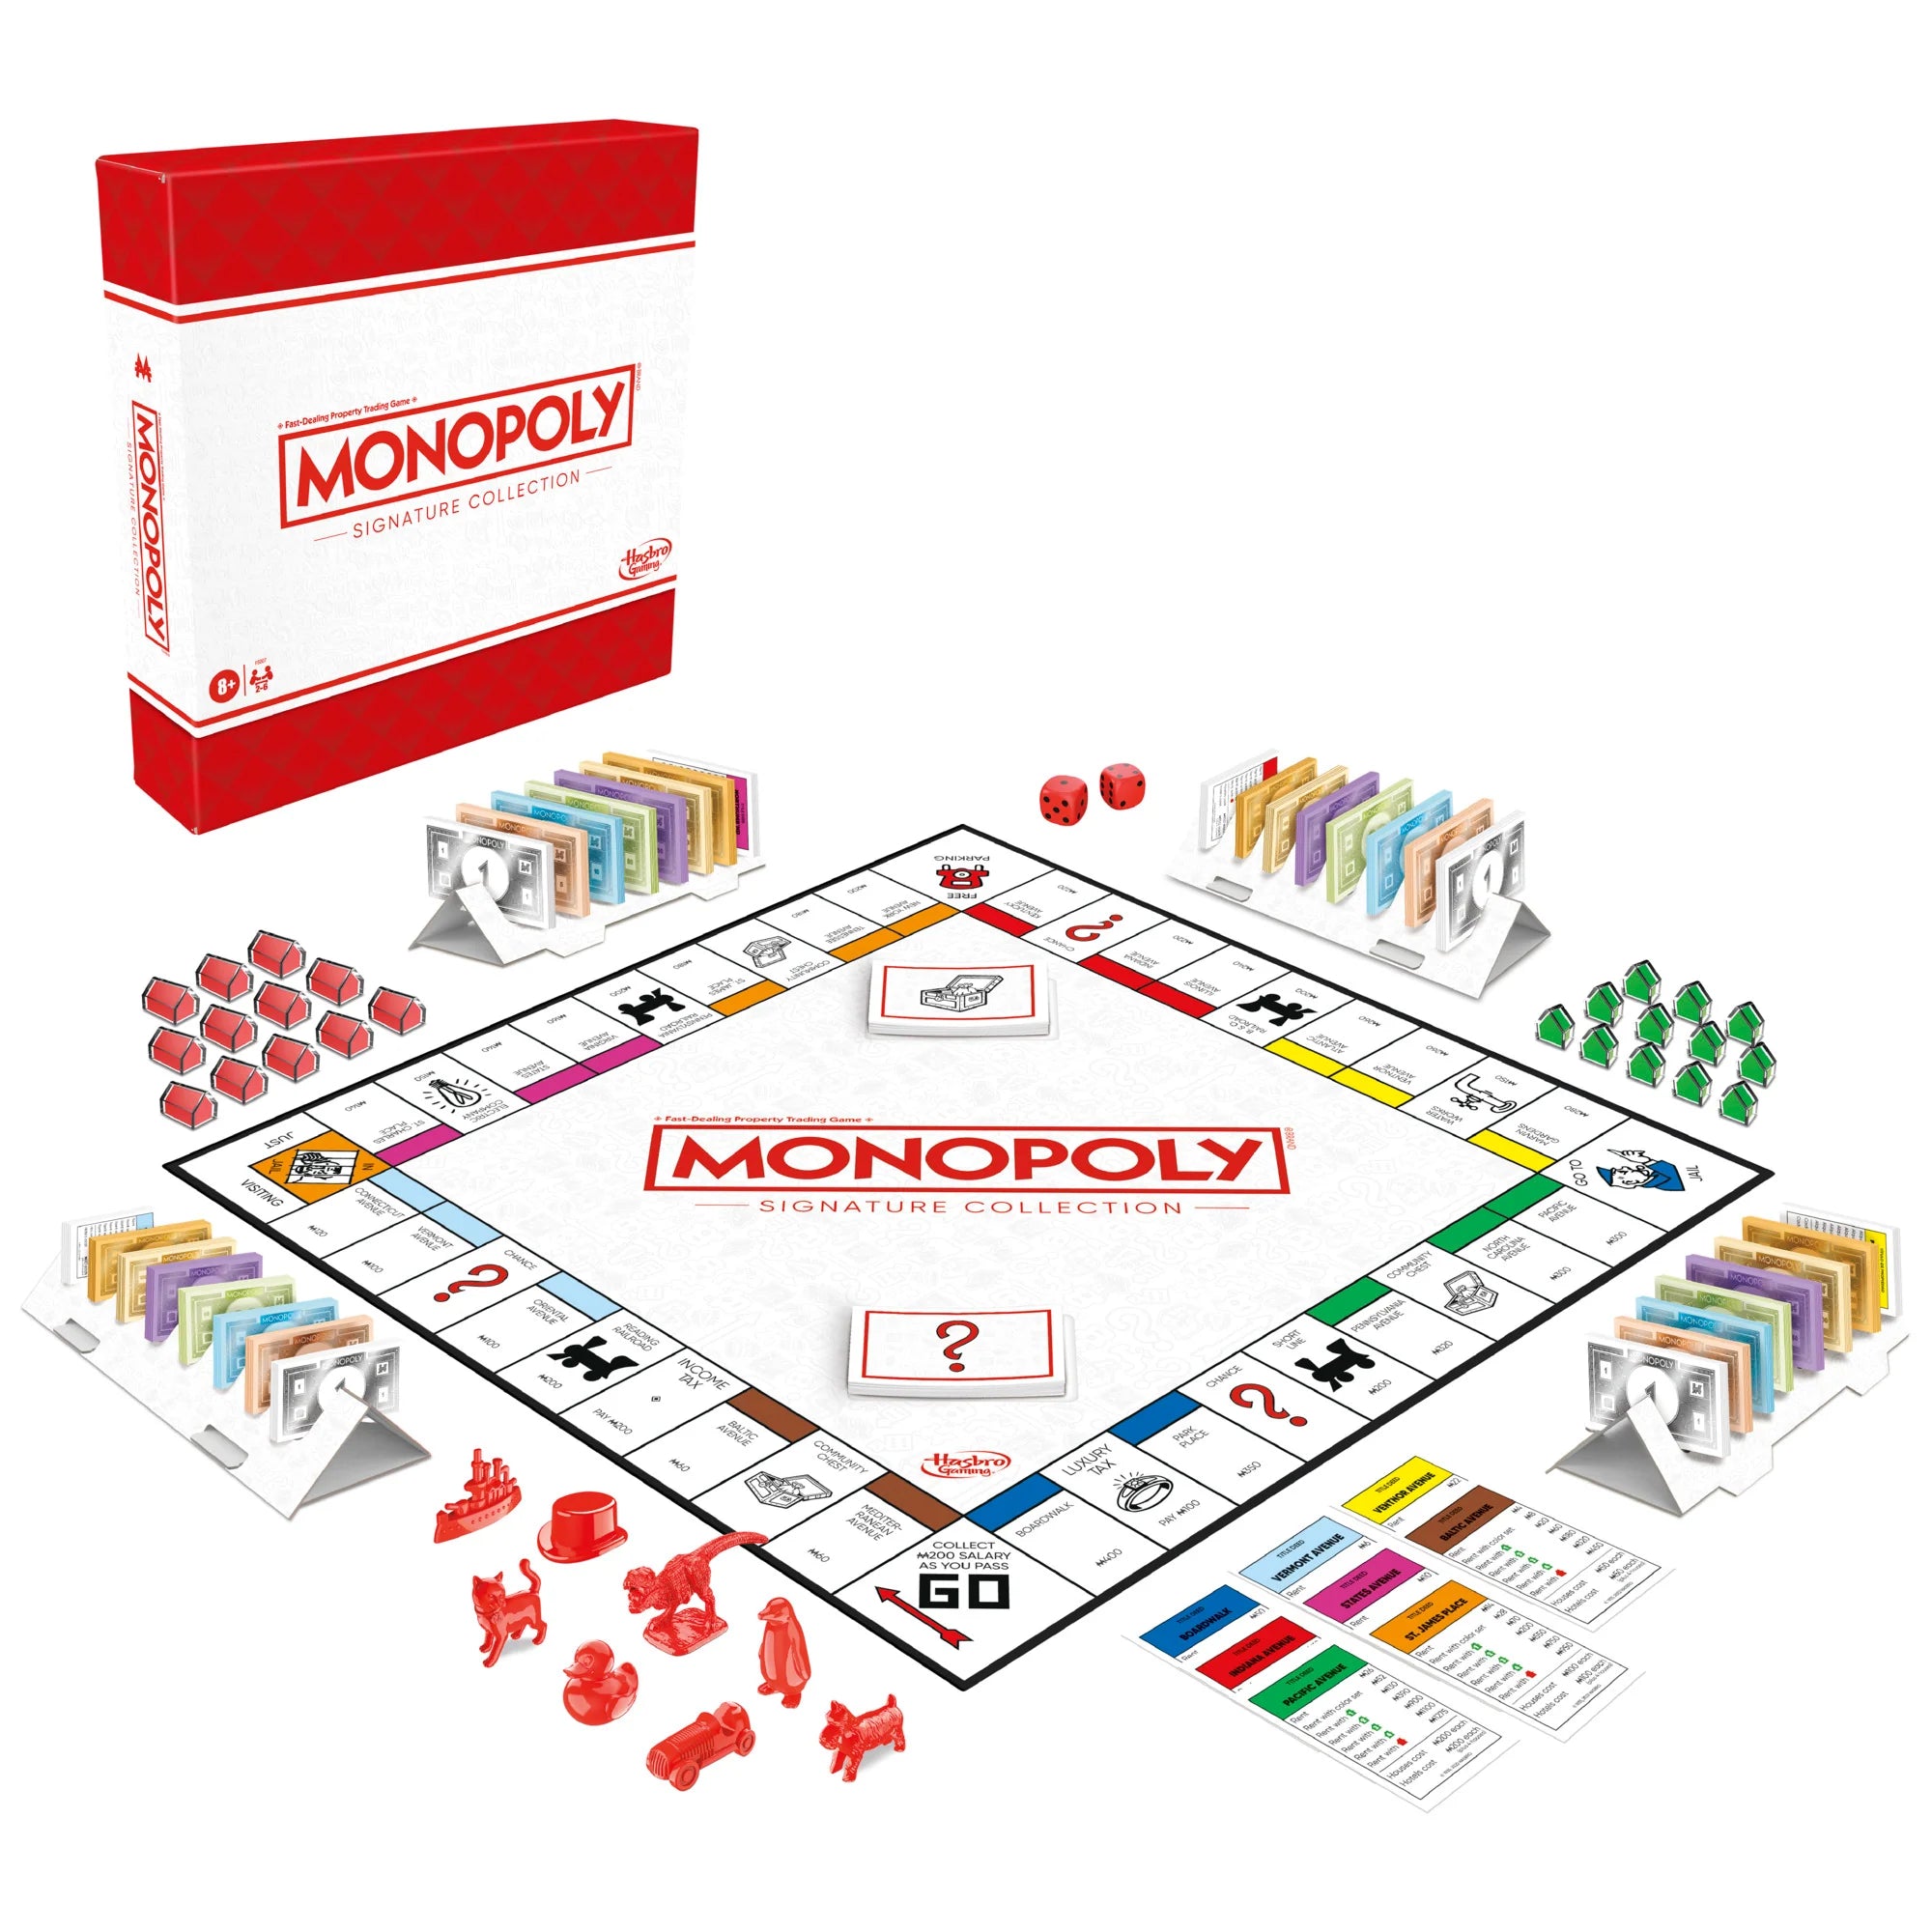 Signature Collection Monopoly